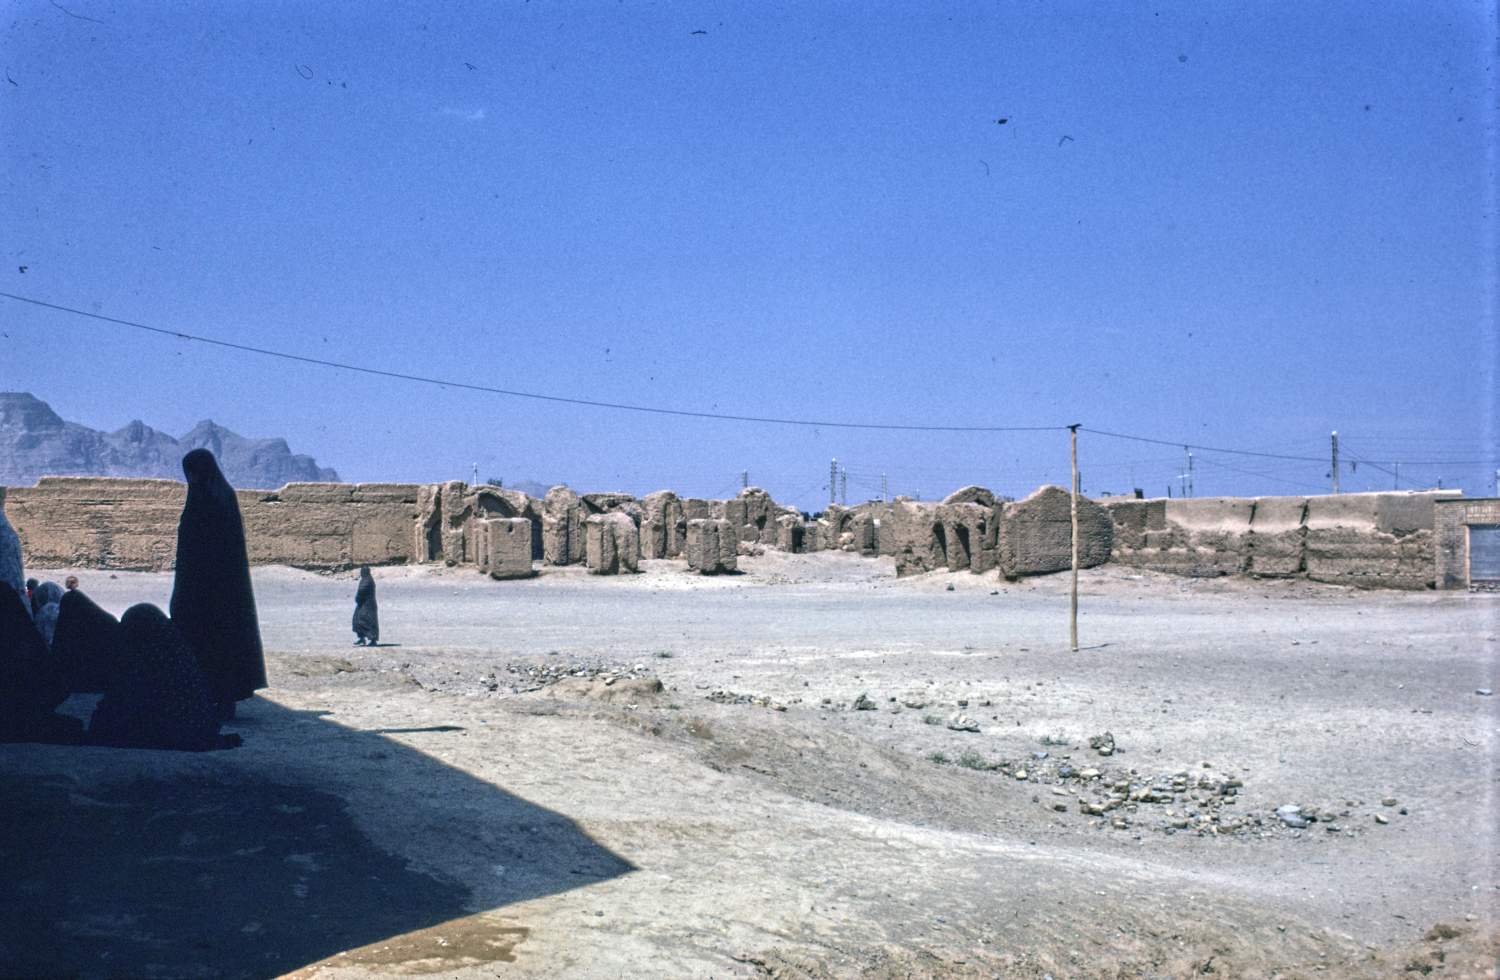 General view of site toward western corner with remains of pillars. Women in foreground.